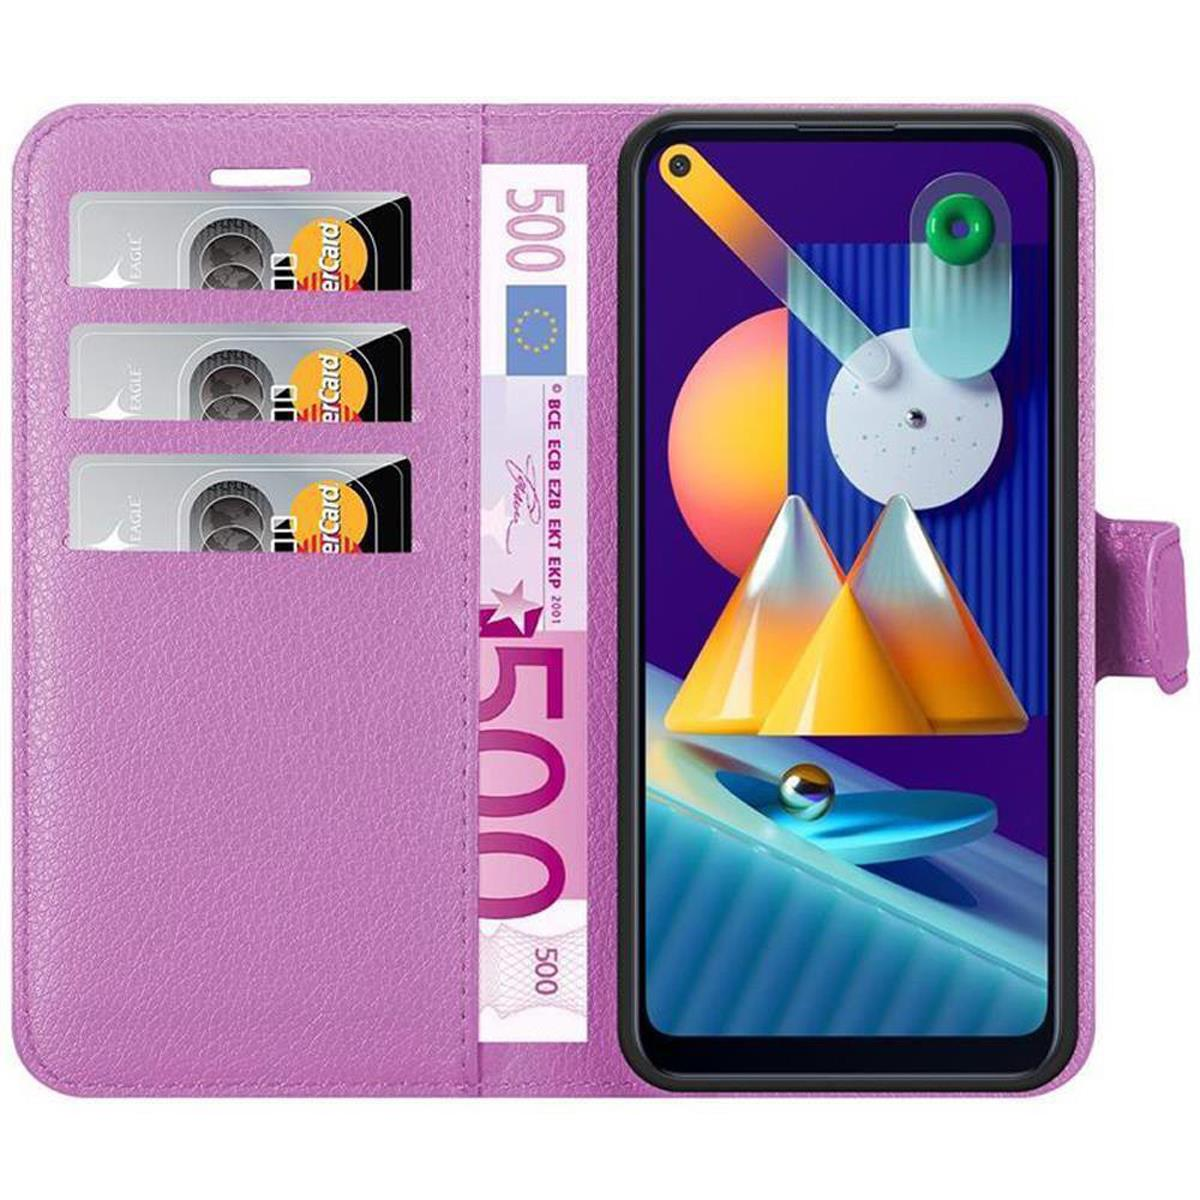 CADORABO Book MANGAN Galaxy A11 Hülle VIOLETT / Samsung, Bookcover, Standfunktion, M11